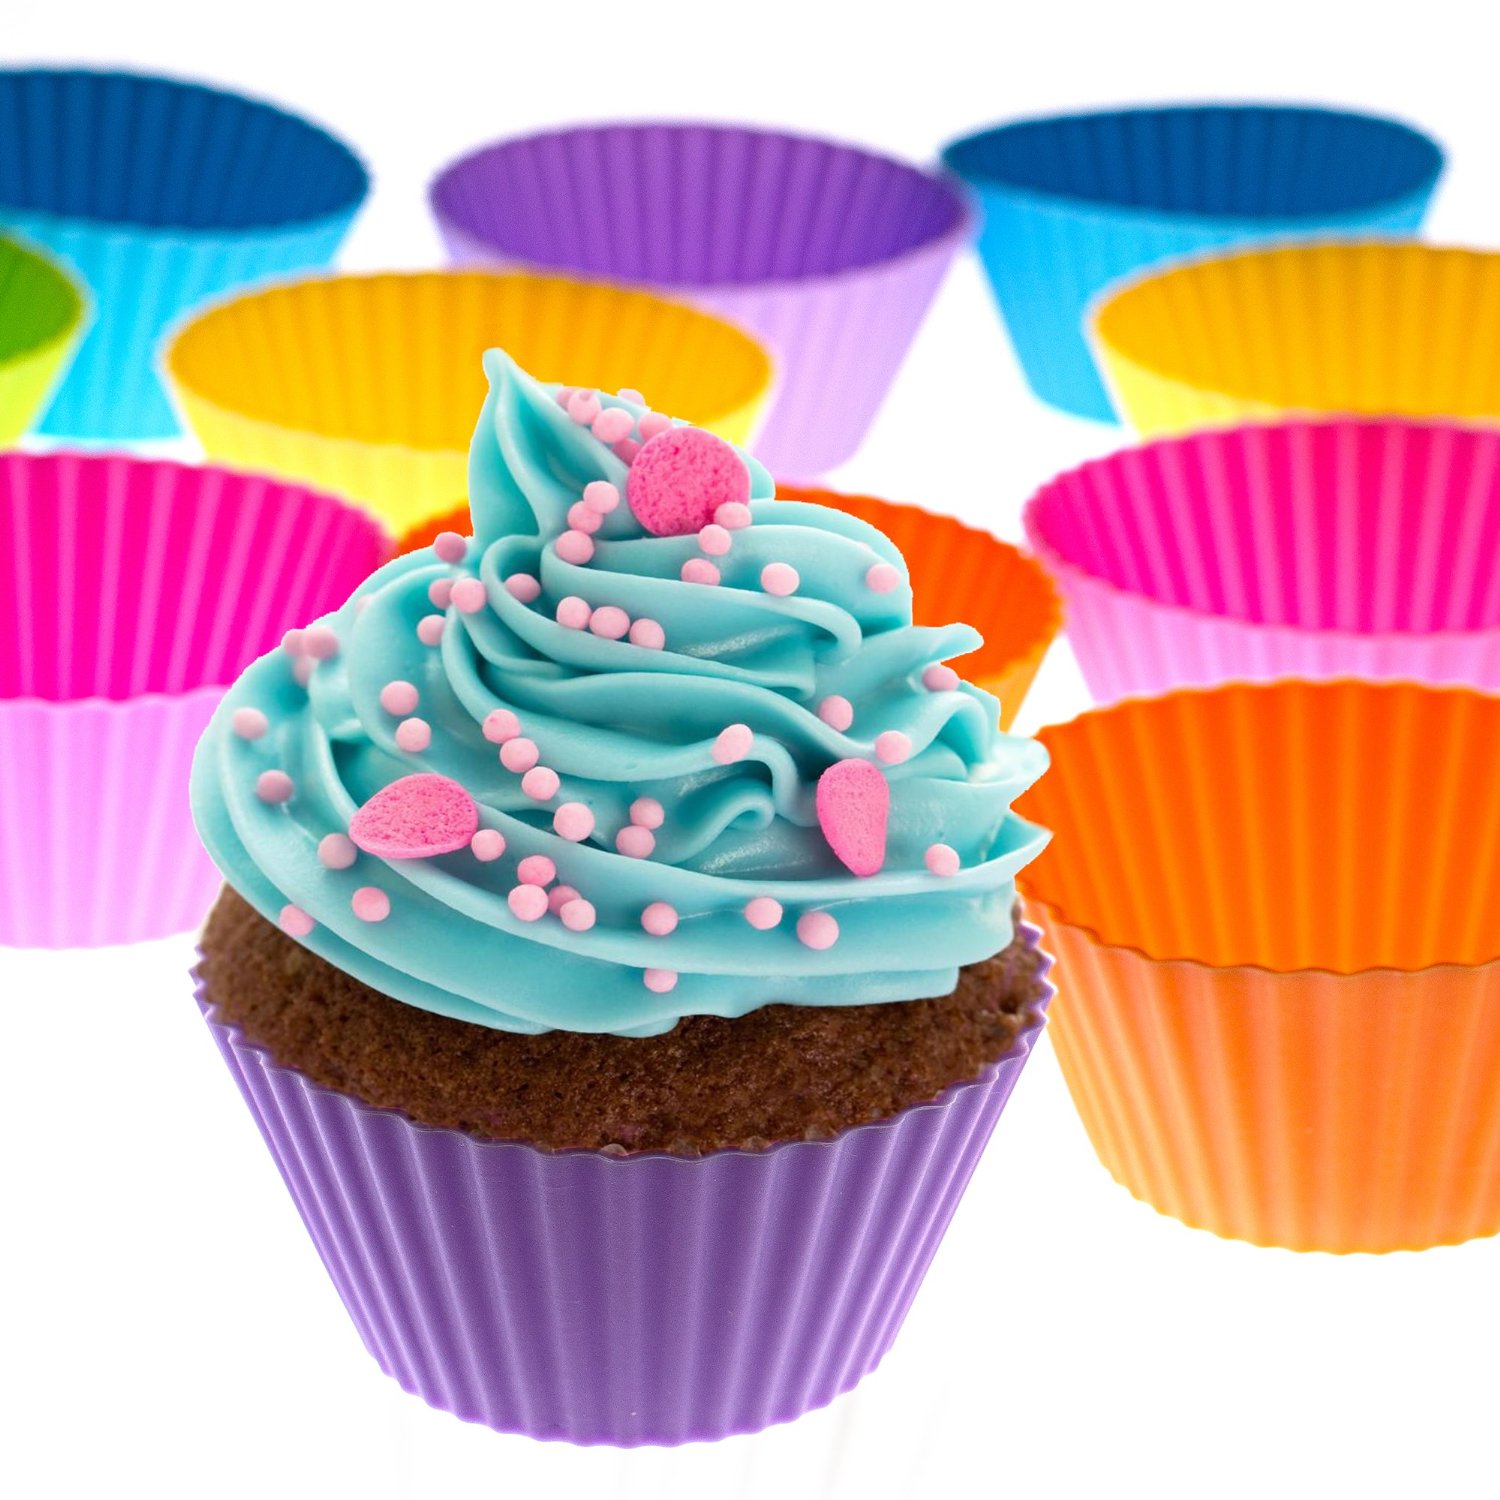 Amazon: Silicone Baking Cups Set of 12 Reusable Cupcake Liners Only $3.